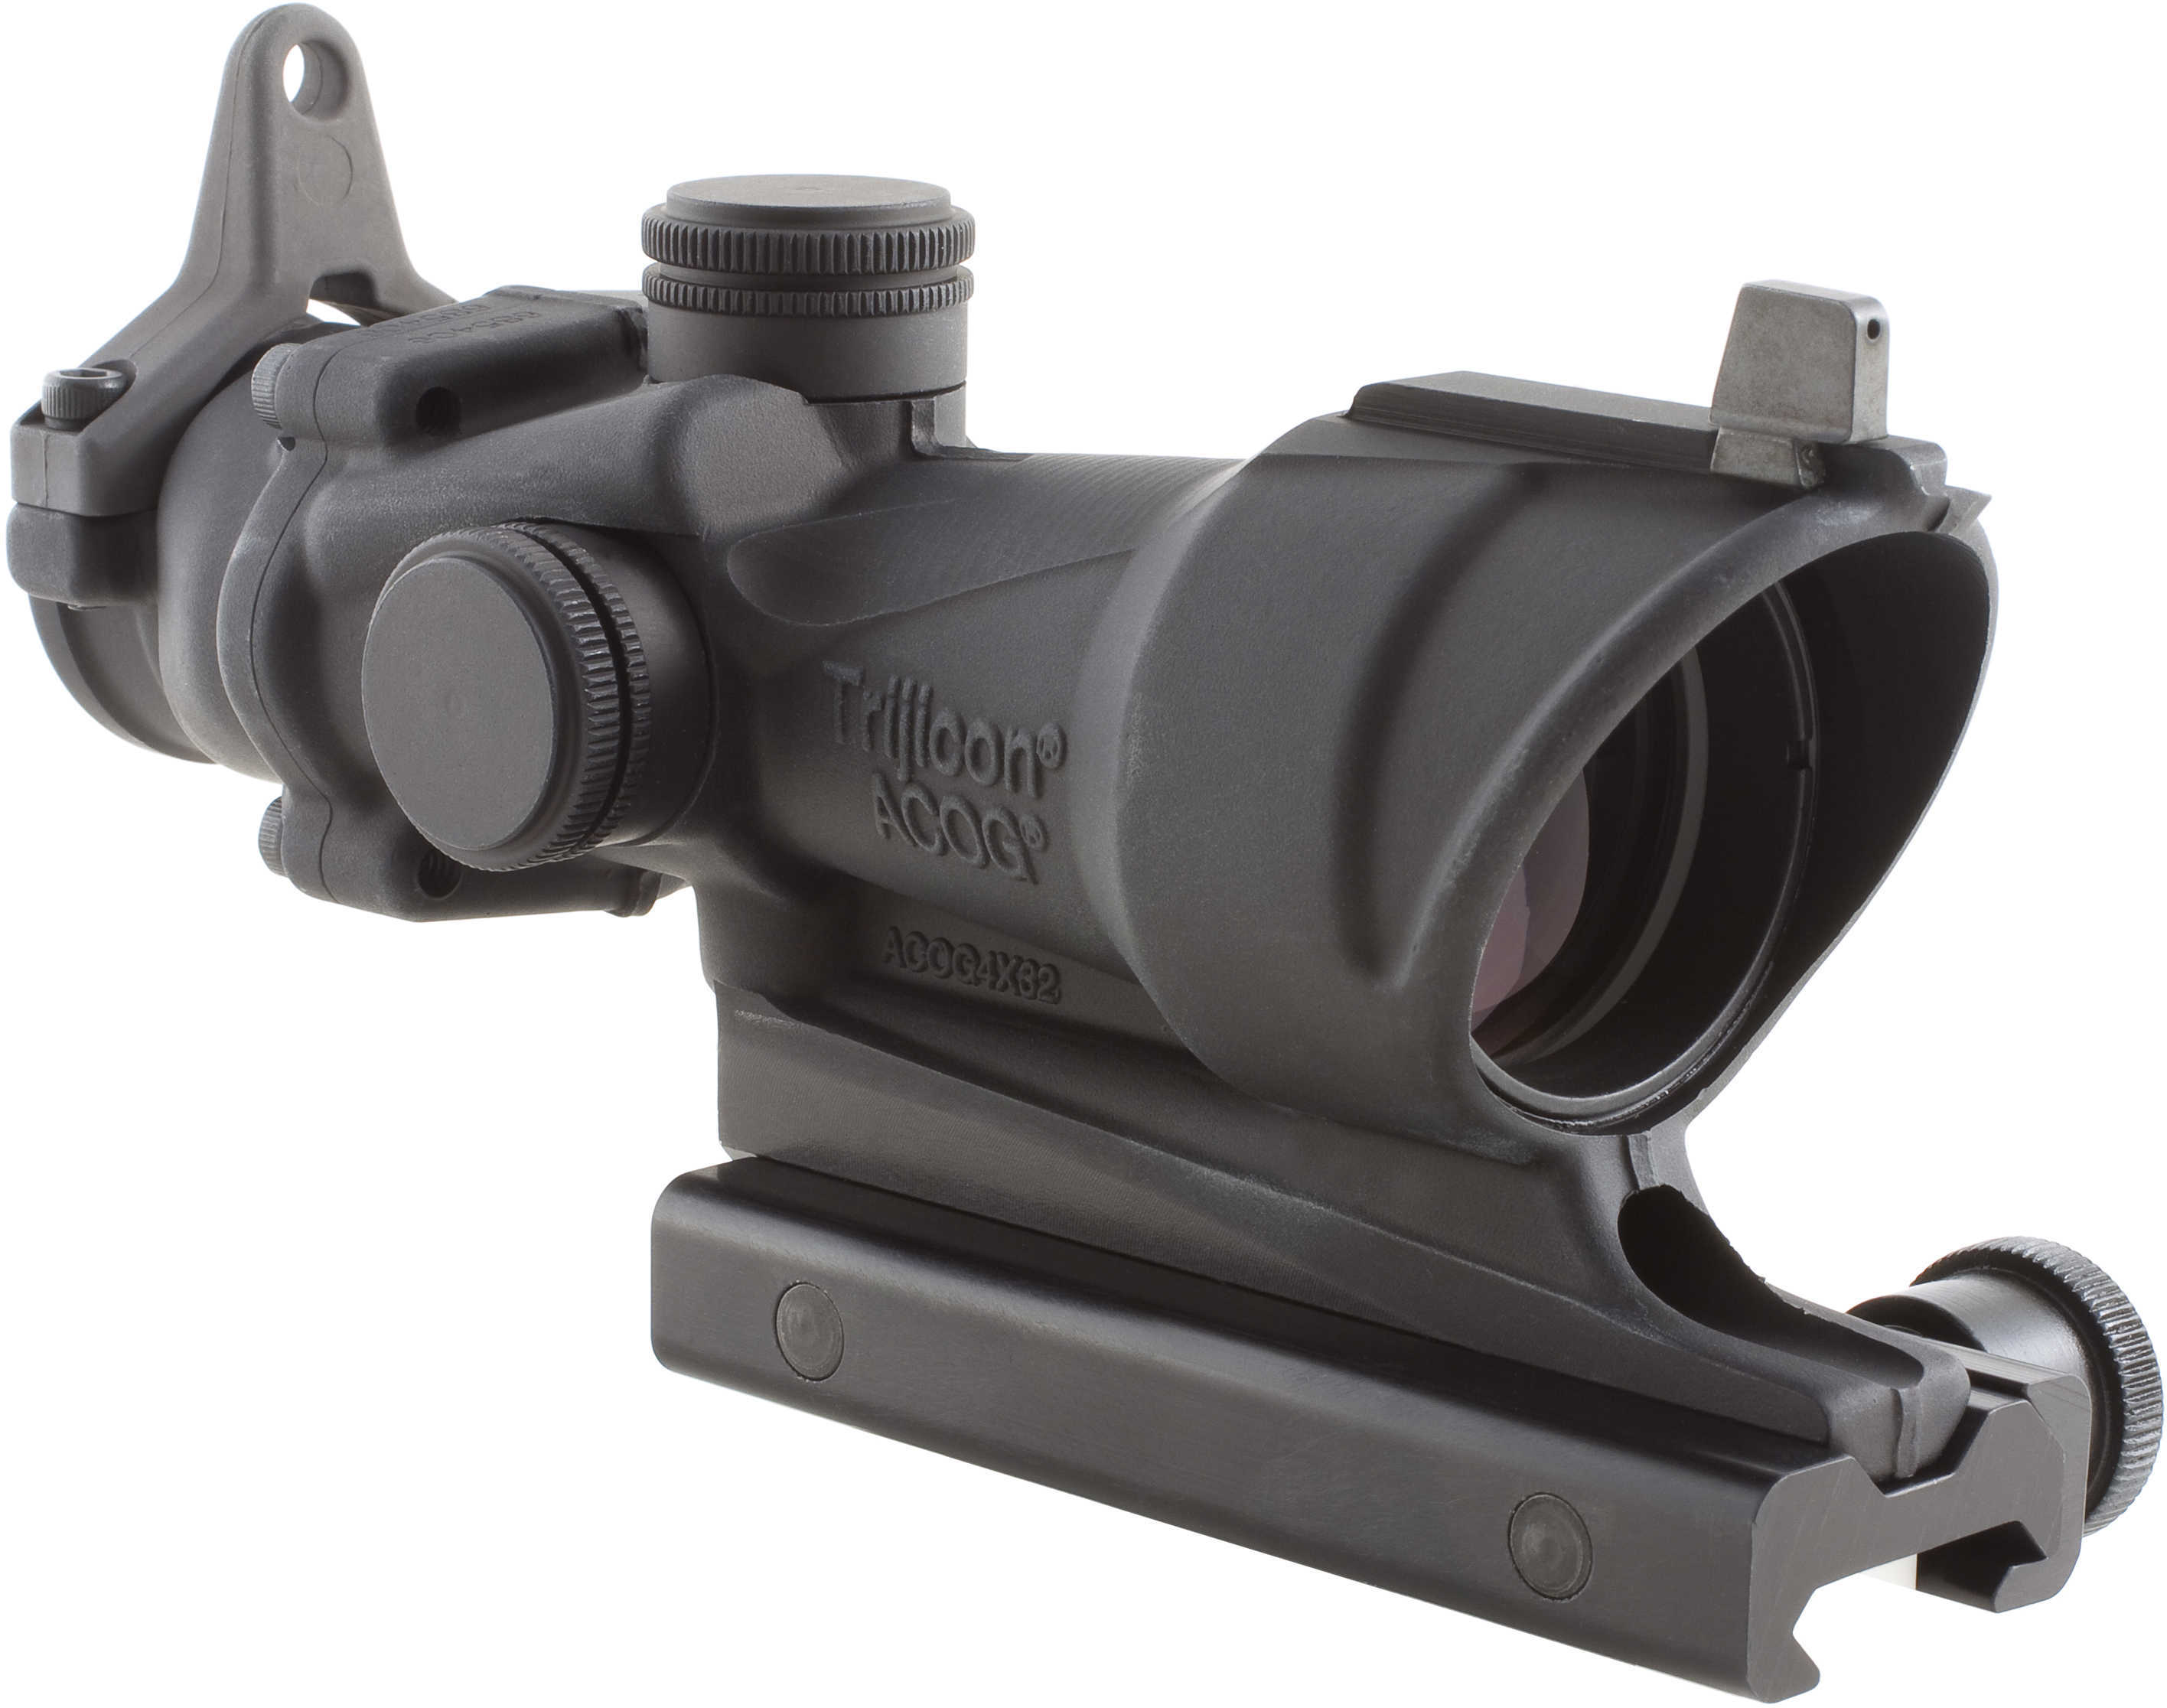 Trijicon ACOG 4X32mm For M4A1 Yellow Center Illumination - Flattop Adapter, Backup Iron Sights, Rubber Scope Cap Cover